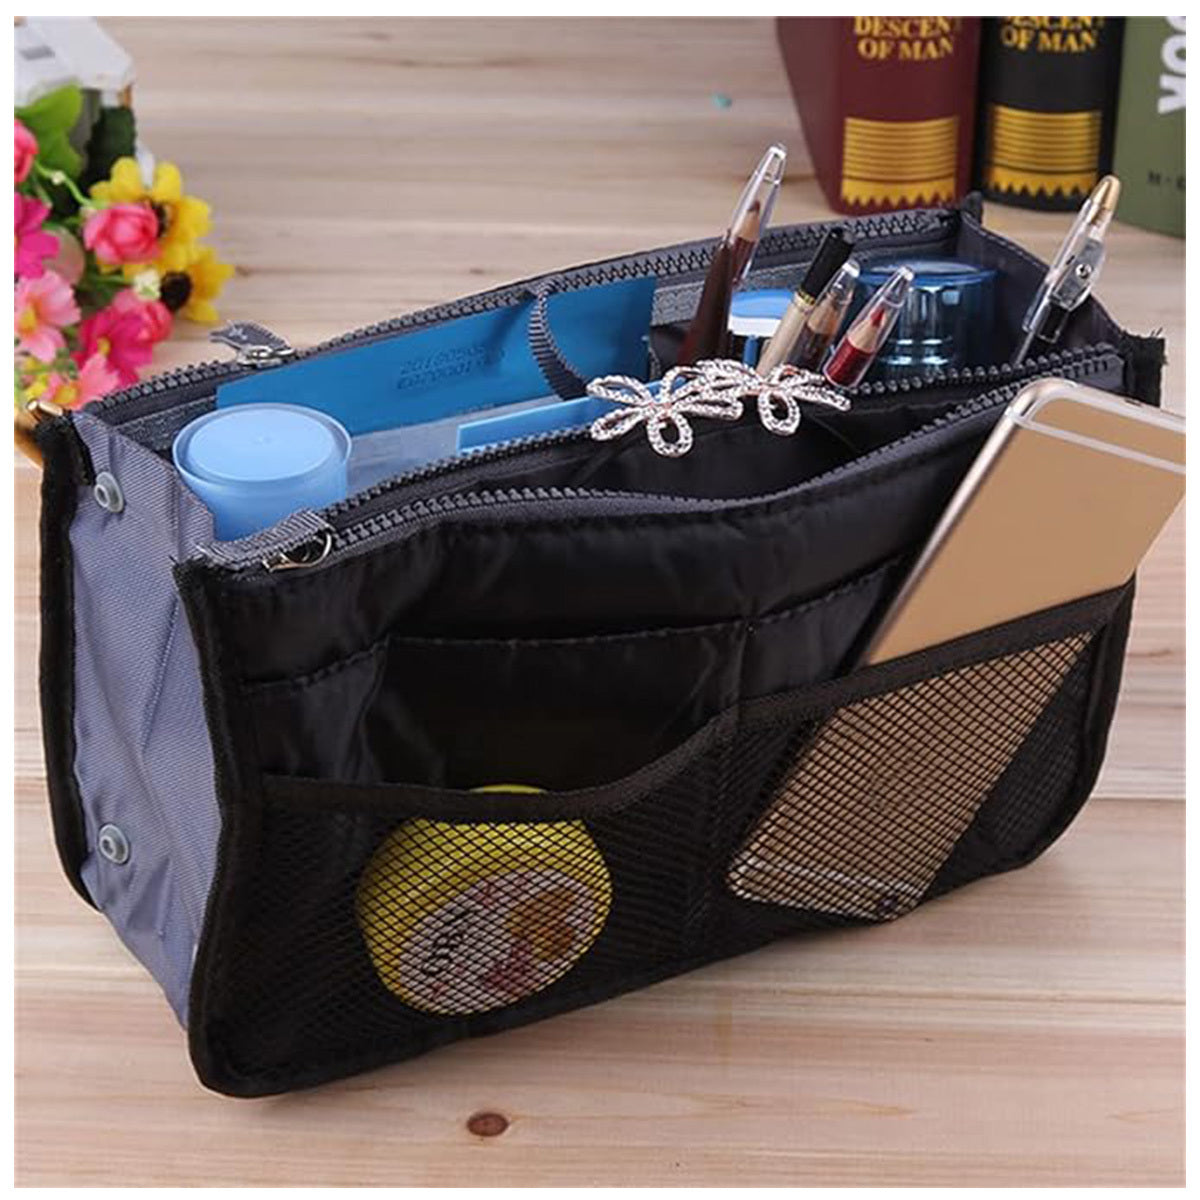 Handbag Organizer Insert For Women With 13 Pockets Large Capacity Lining Zipper Handle Portable Women's Purse Bag Travel Documents Cards Small Items